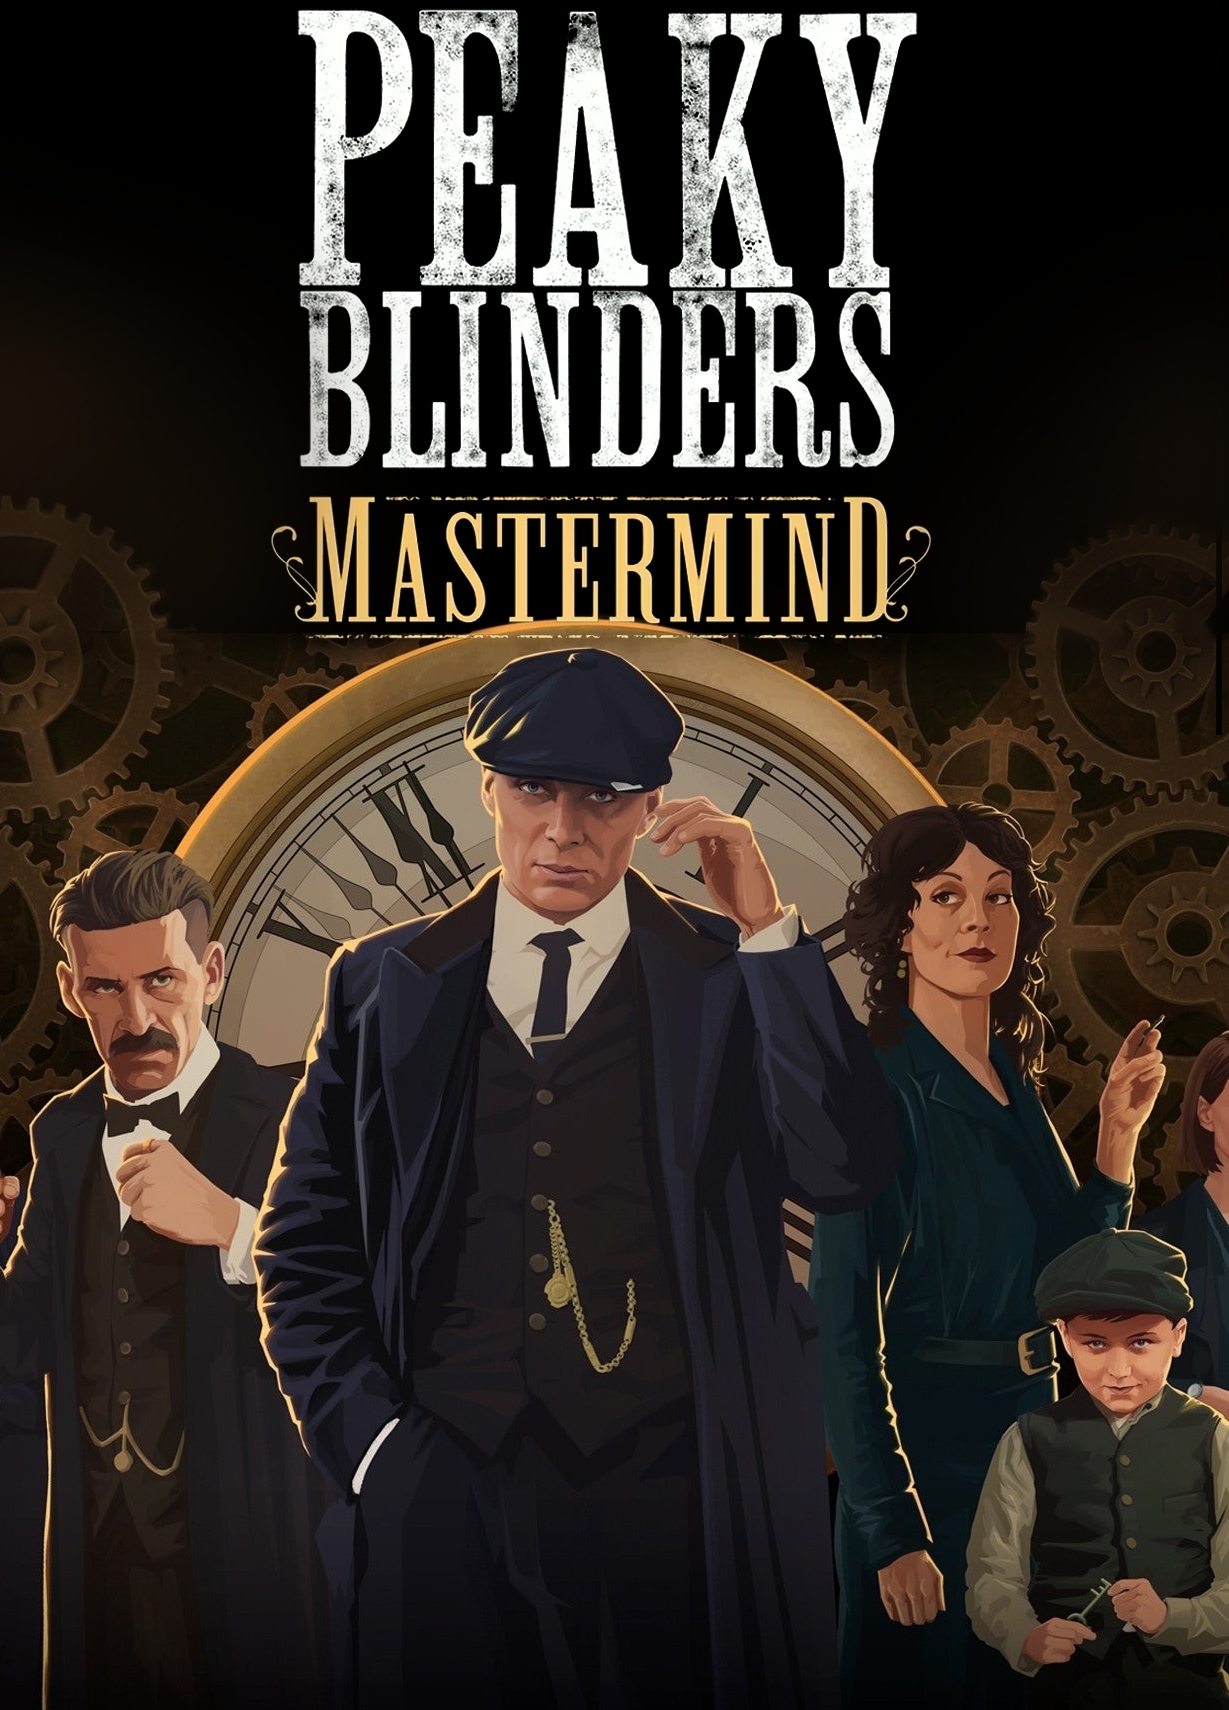 Peaky Blinders for PS4, Xbox One, PC and Nintendo Switch